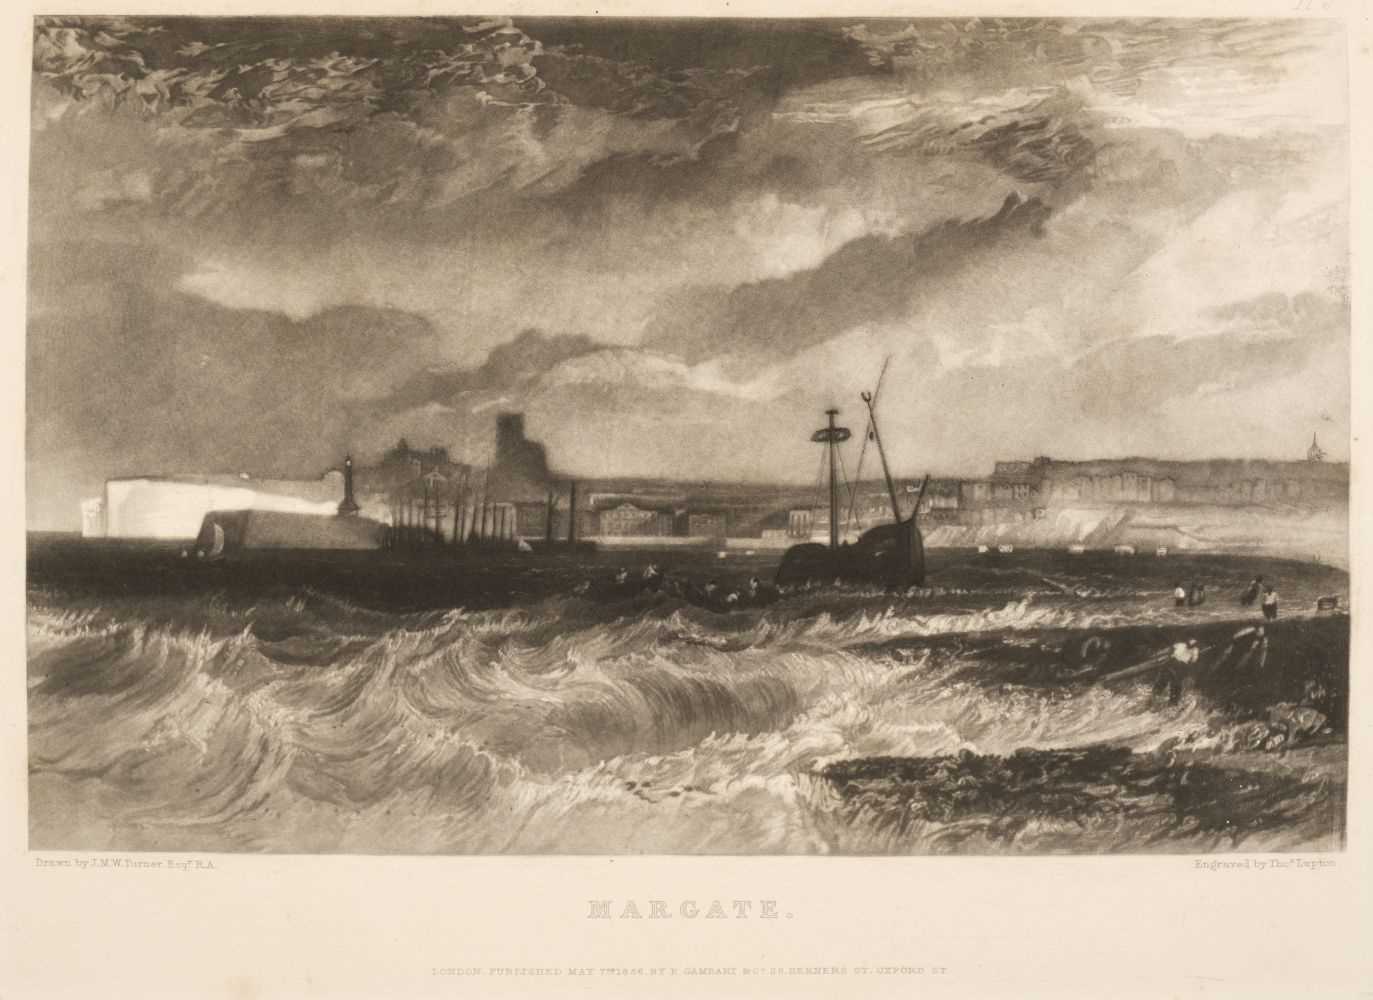 Lot 45 - Turner (J.M.W.) The Harbours of England, 1856